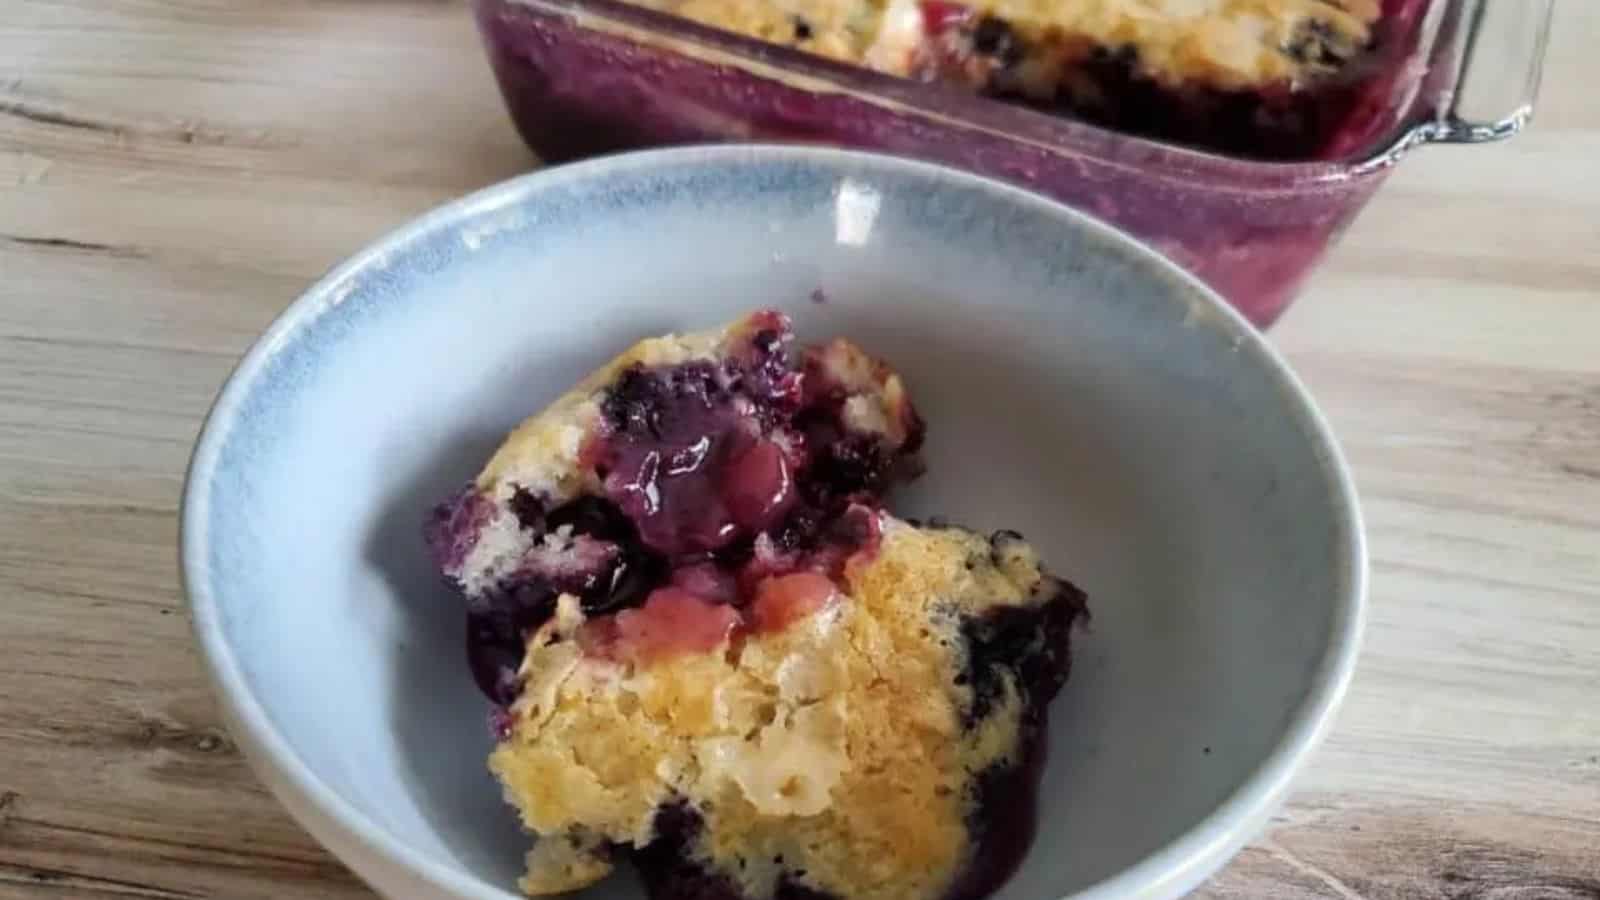 Image shows Blueberry Pudding Cake in a blue bowl with the full dish behind it.